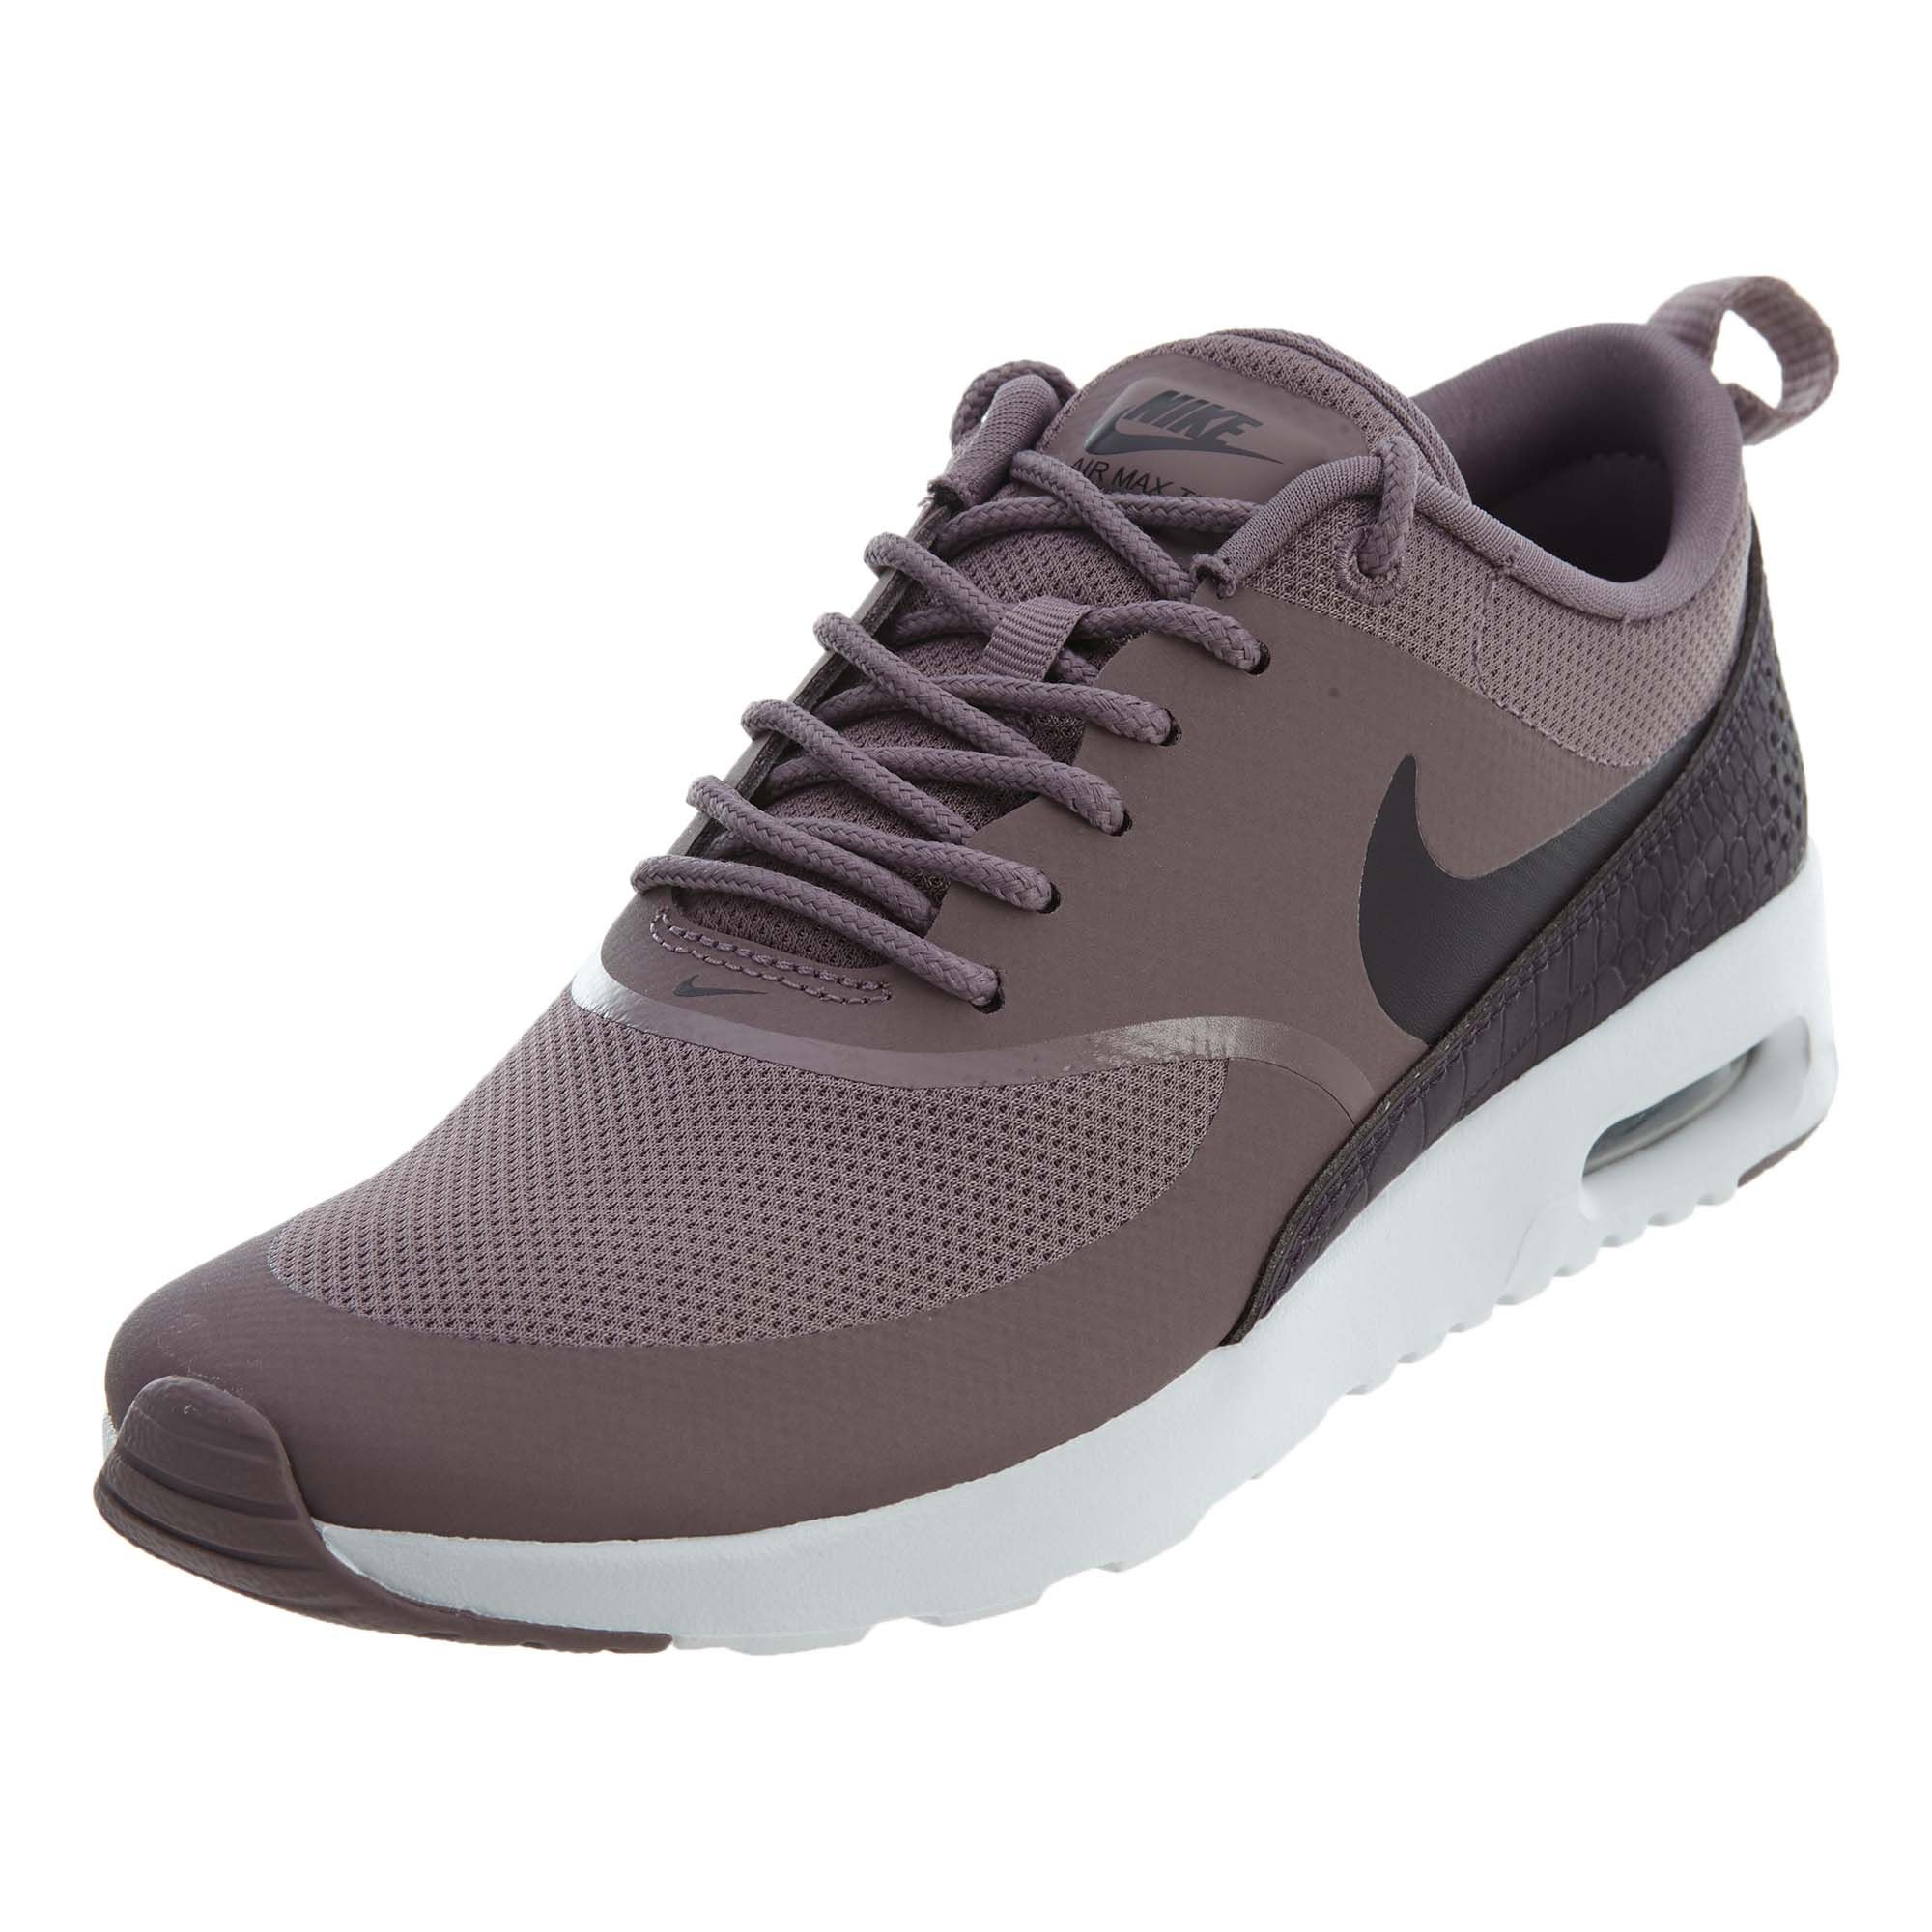 women's air max thea shoes - taupe grey/port wine